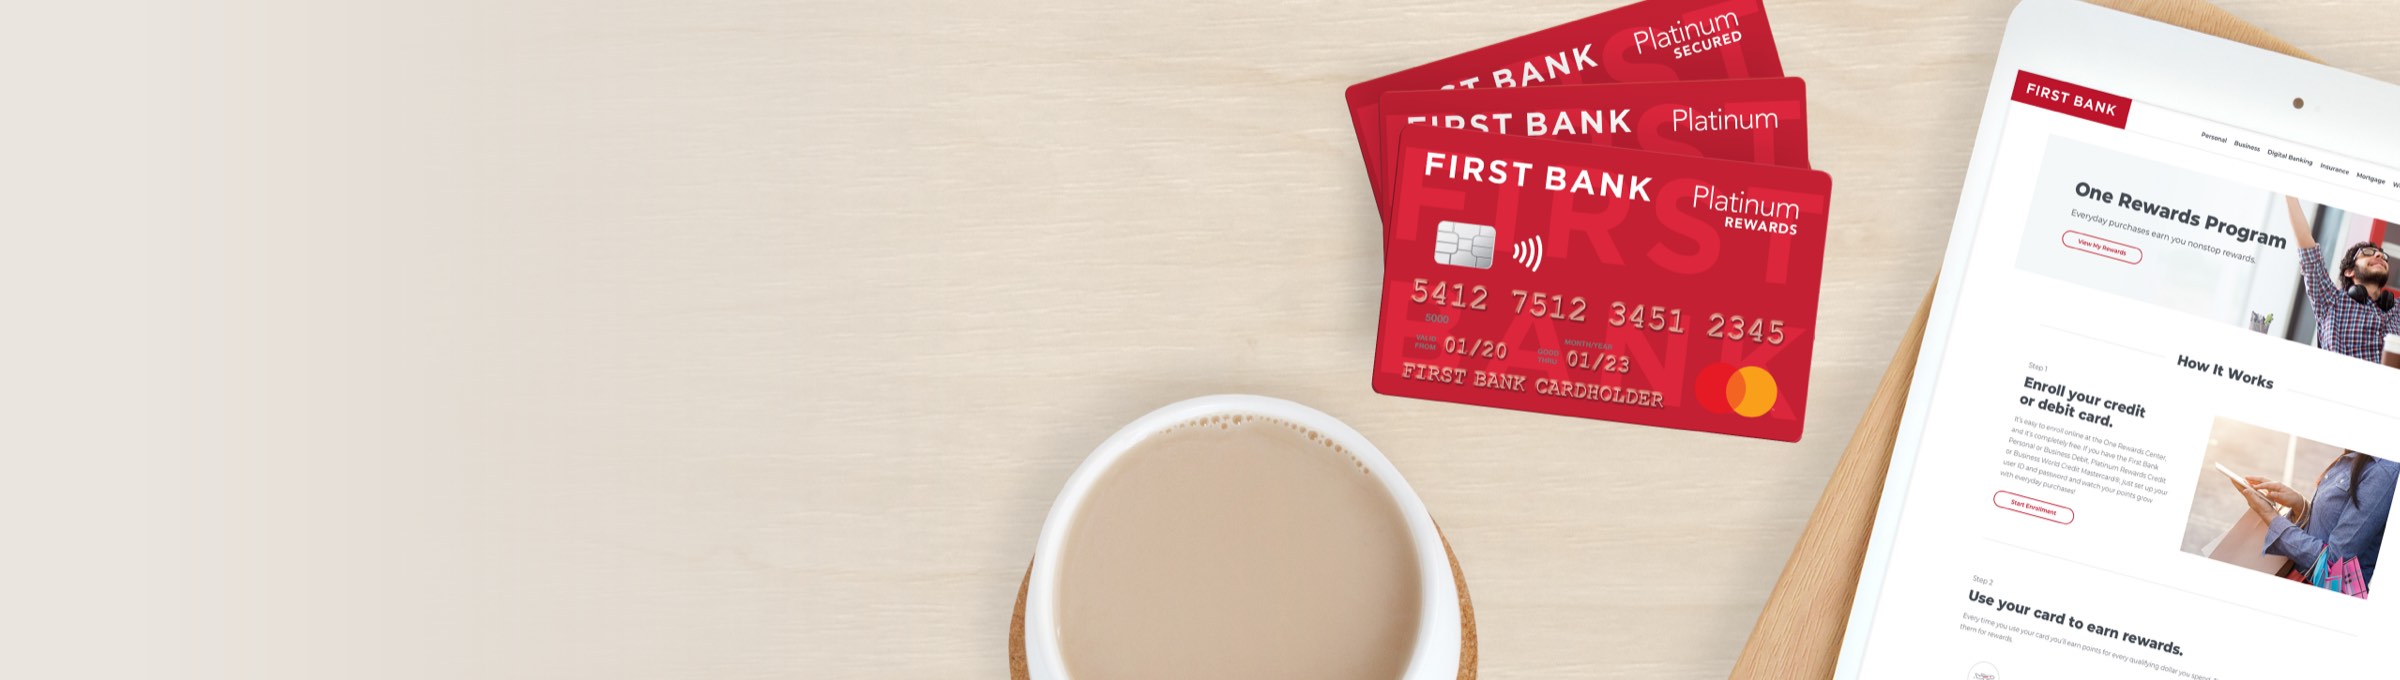 First Bank Credit Cards on table with coffee cup and ipad